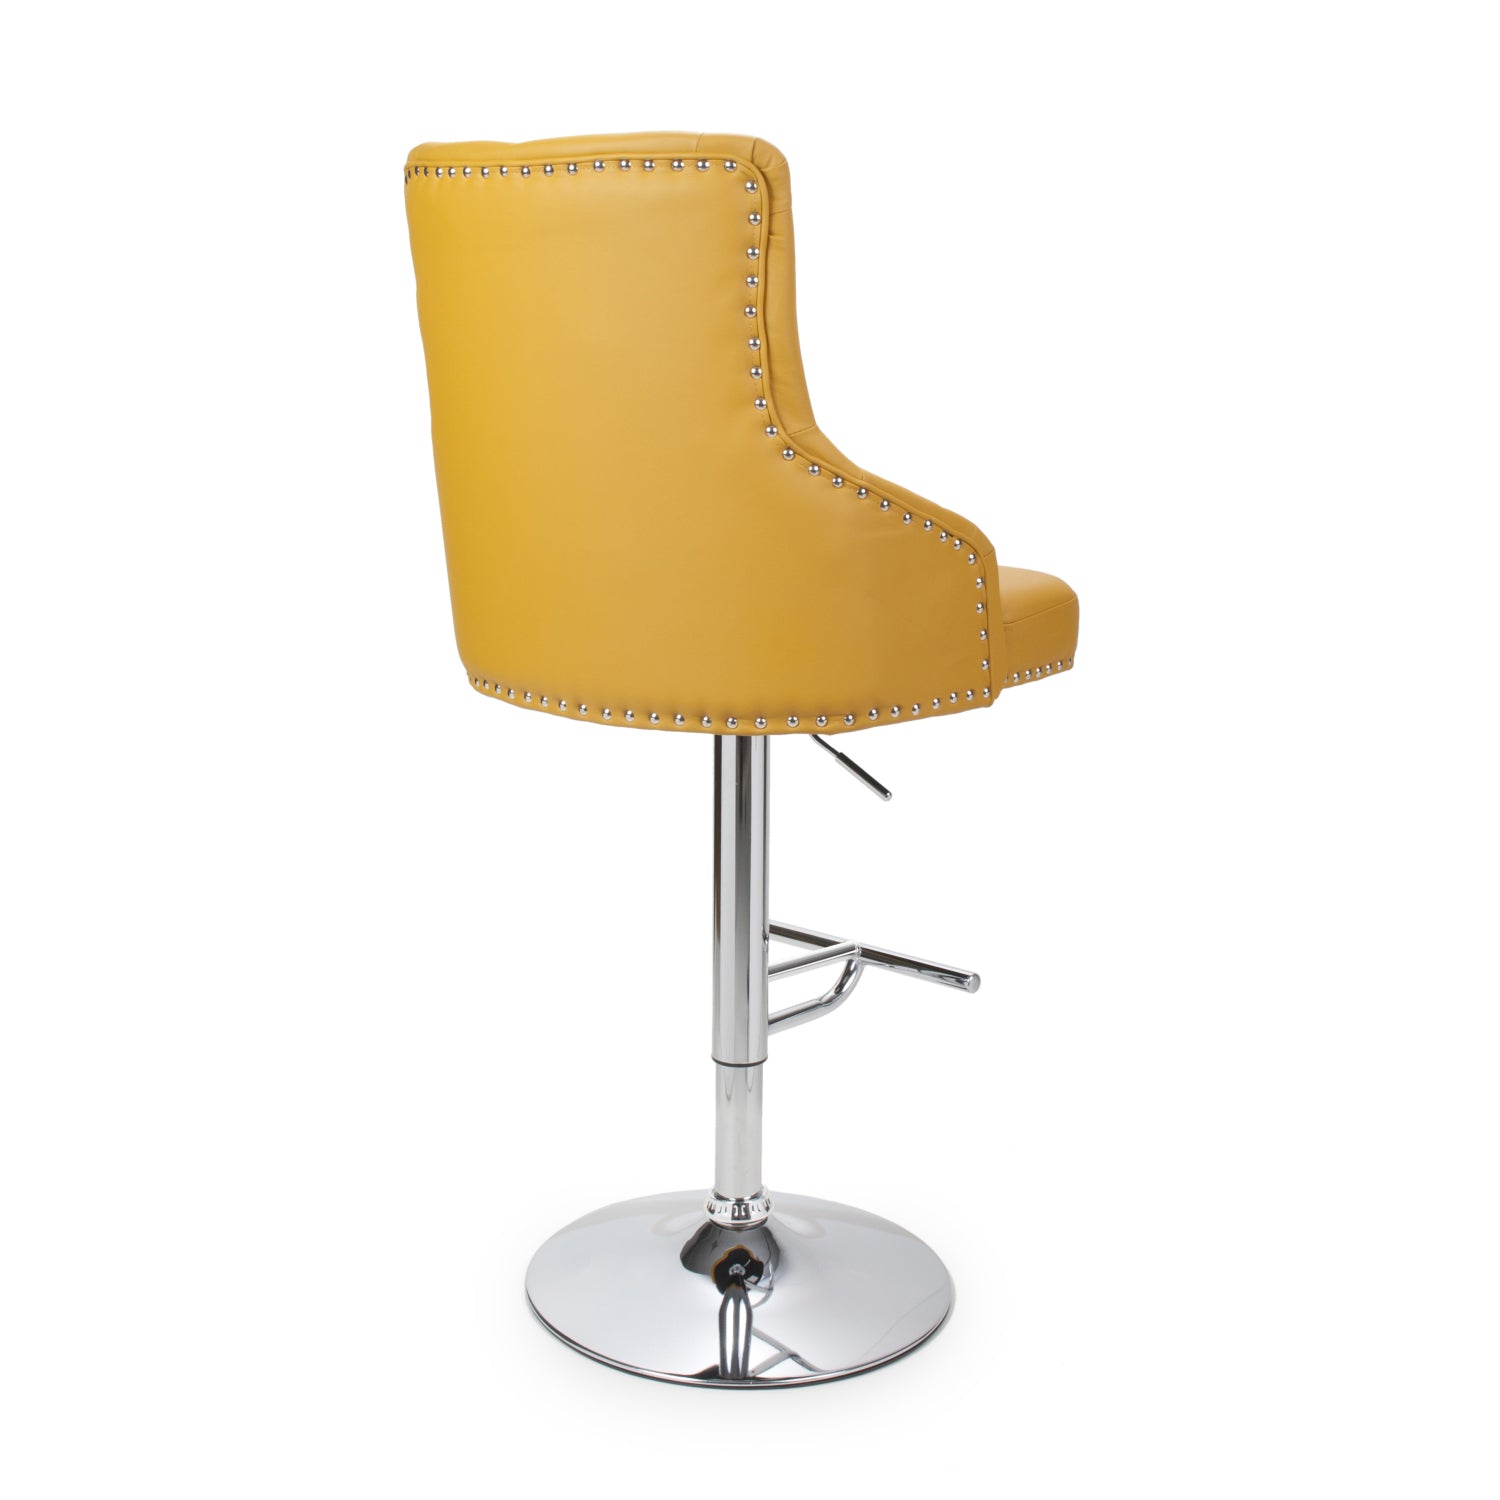 Rocco leather effect adjustable bar stools from Top Secret Furniture